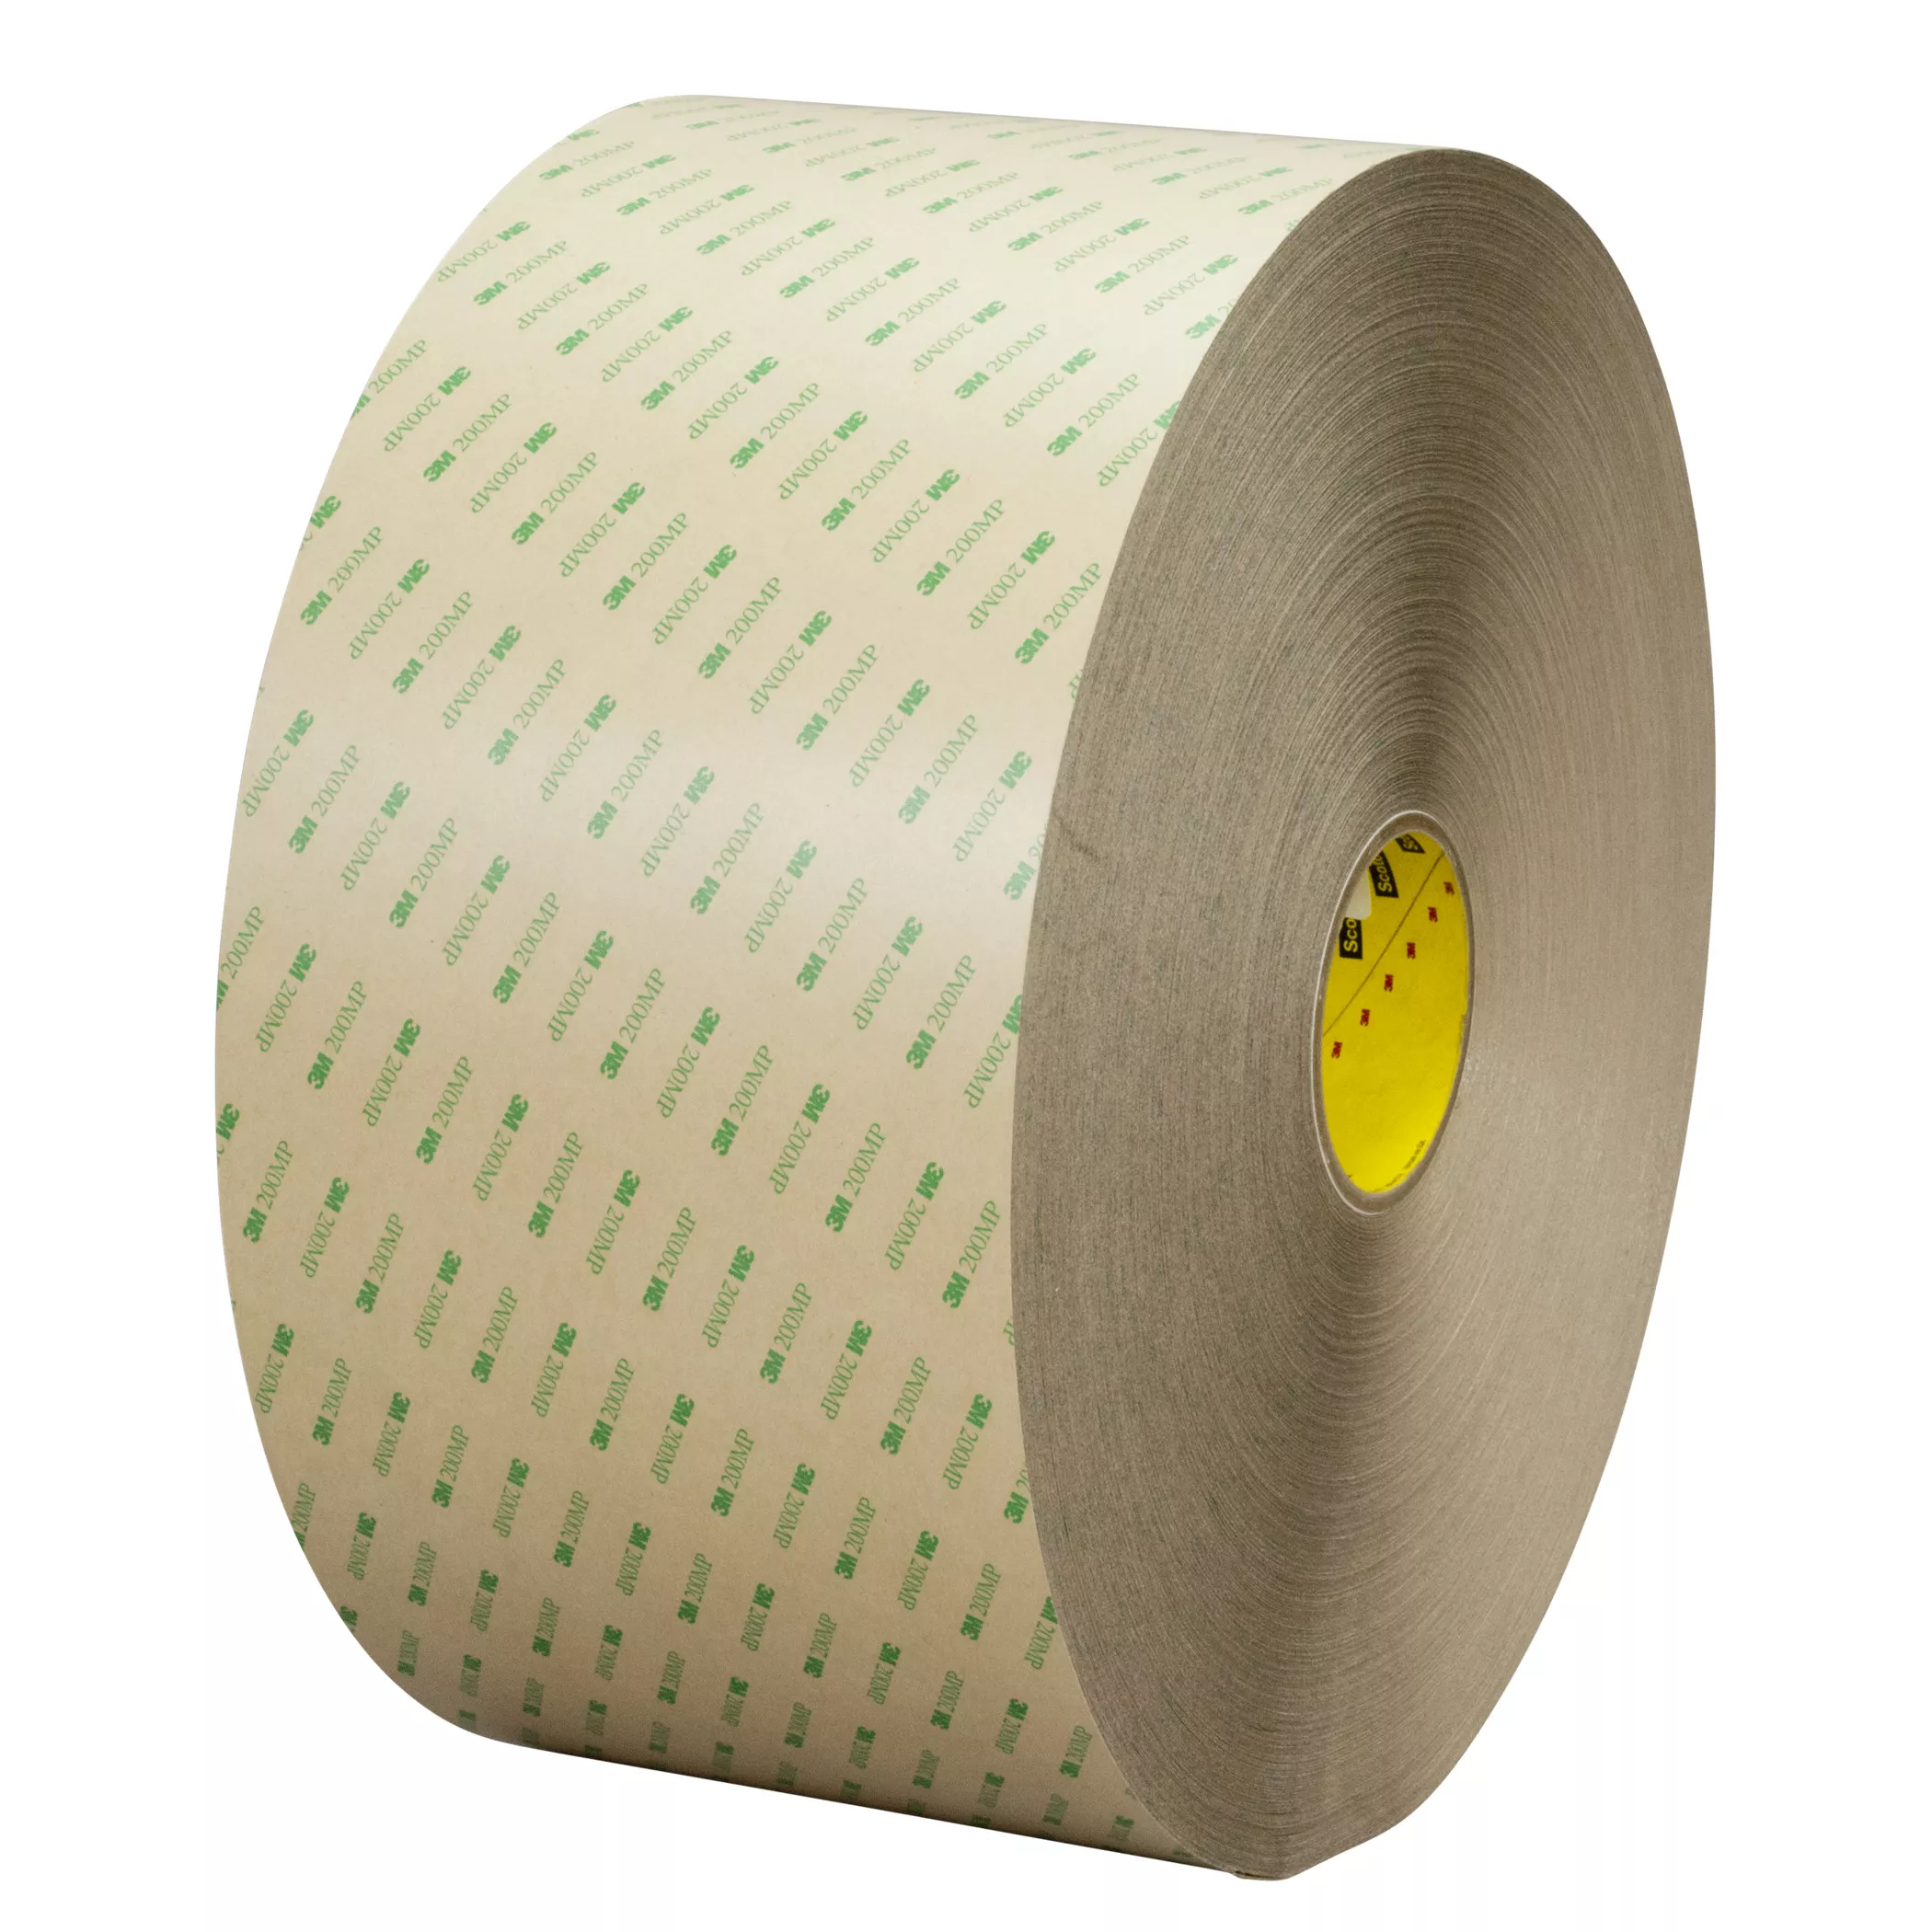 3M™ Adhesive Transfer Tape 9668MP, Clear, 27 in x 60 yd, 5 mil, 1
Roll/Case